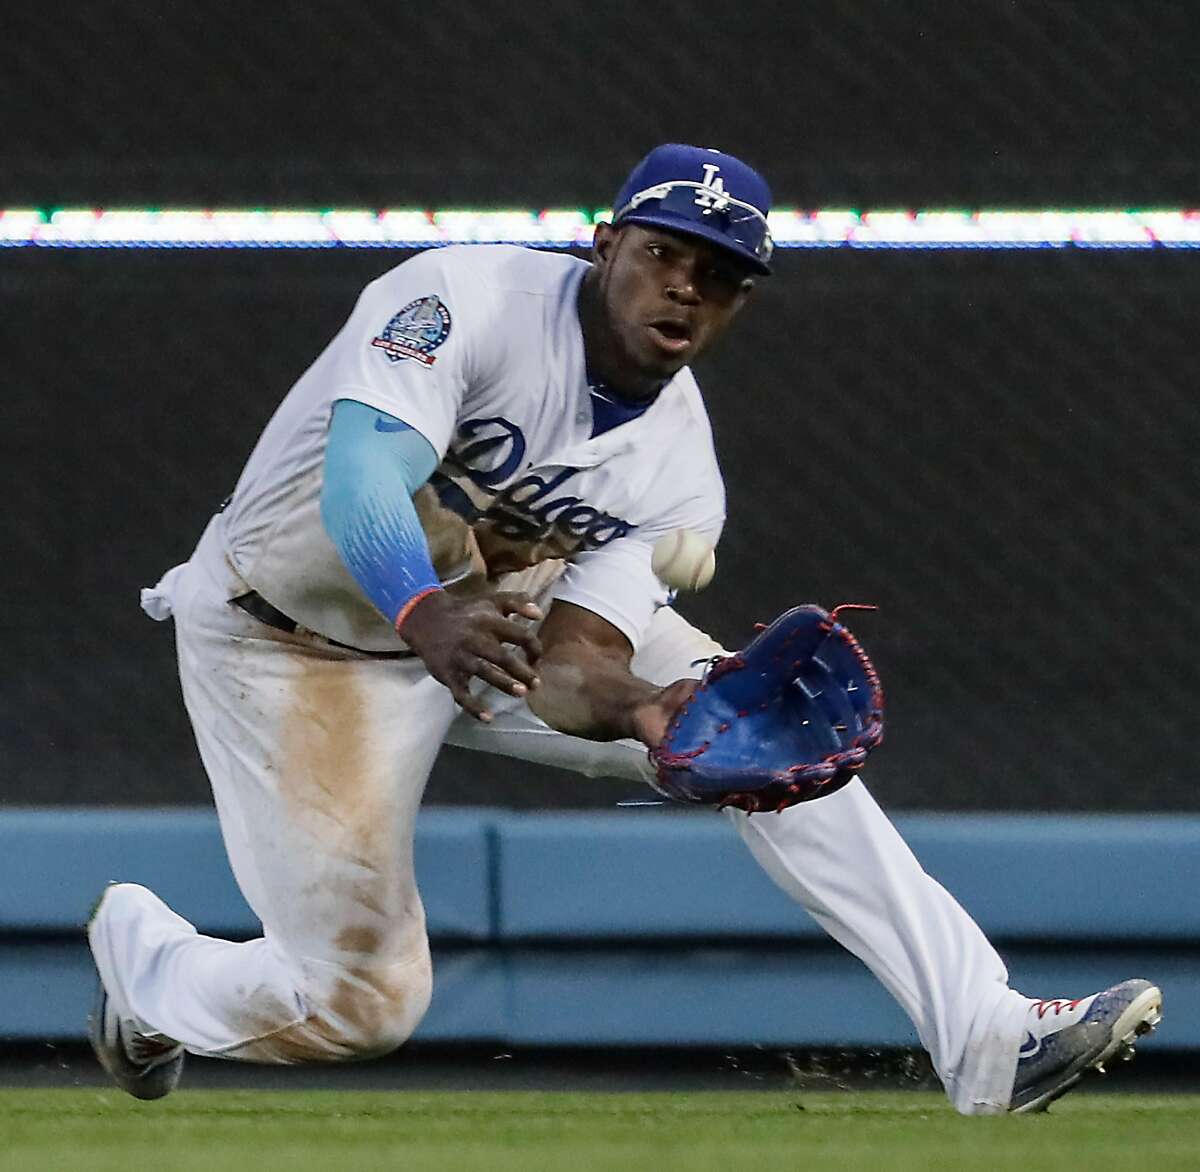 Los Angeles Dodgers right fielder Yasiel Puig makes a sliding catch of a long drive from San Francisco Giants first baseman Brandon Belt to end a sixth inning scoring threat on Sunday, April 1, 2018 at Dodger Stadium in Los Angeles, Calif. (Robert Gauthier/Los Angeles Times/TNS)